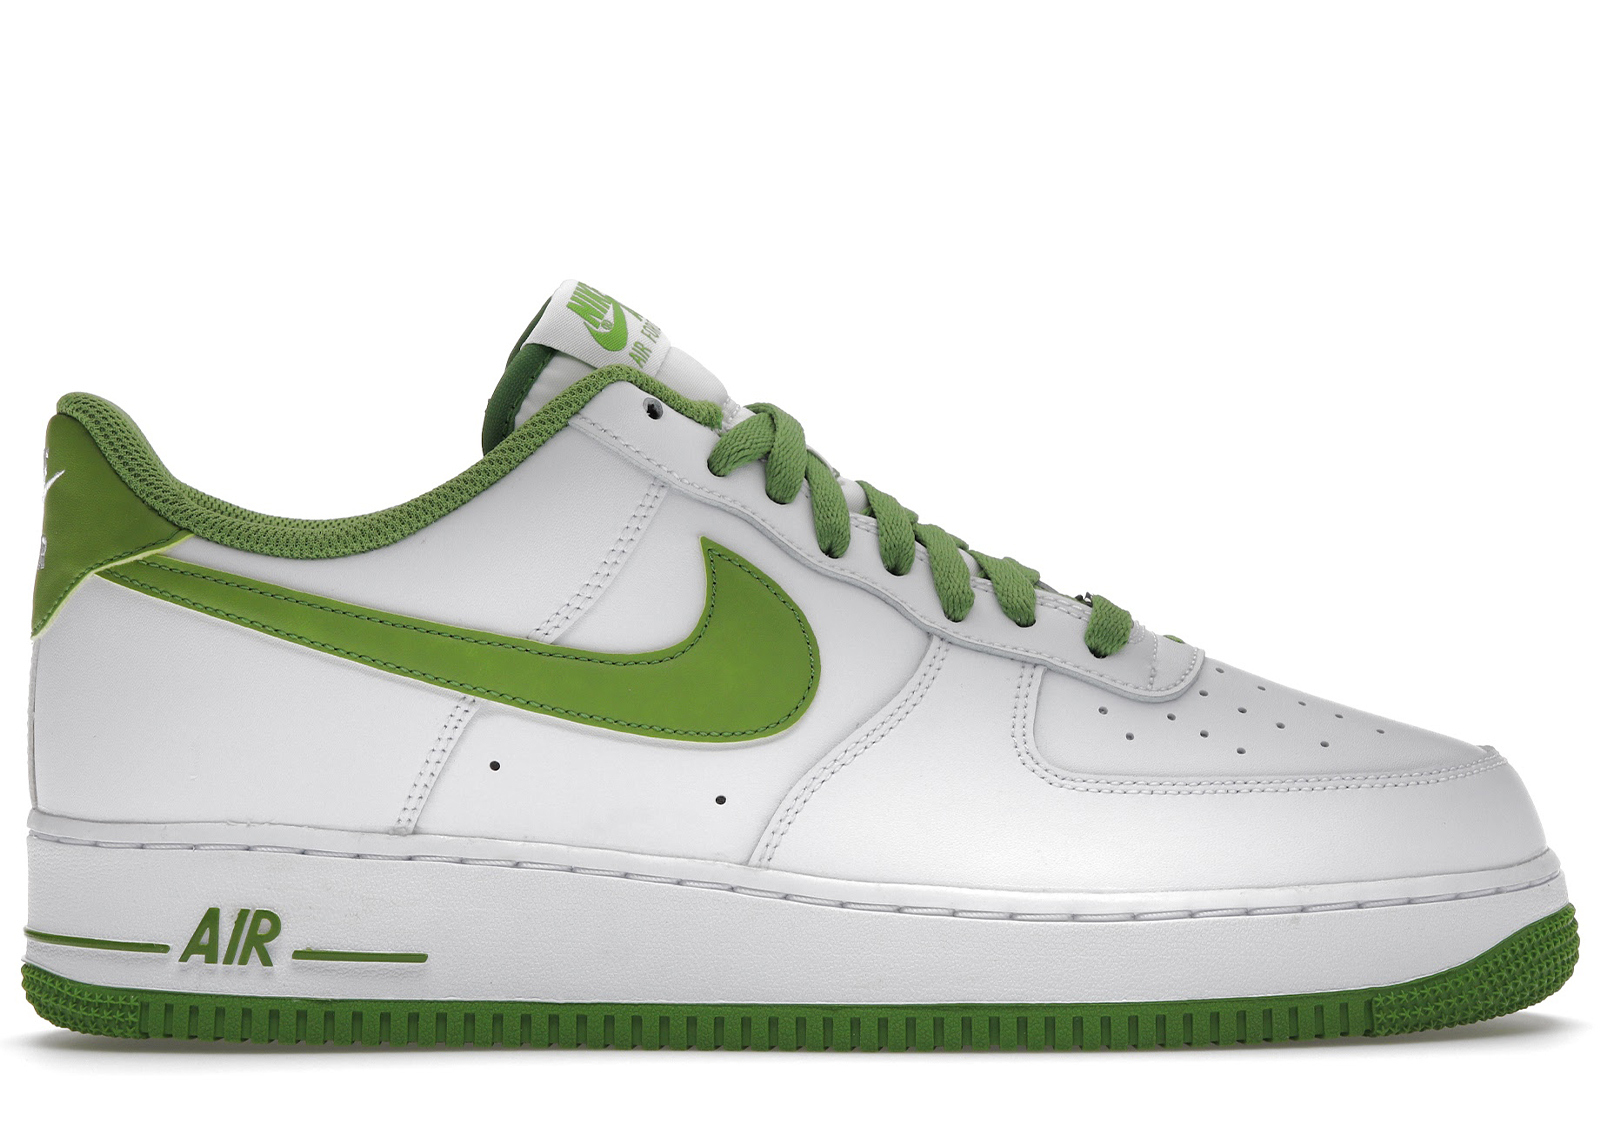 Nike Air Force 1 Low '07 White Chlorophyll Men's - DH7561-105 - US